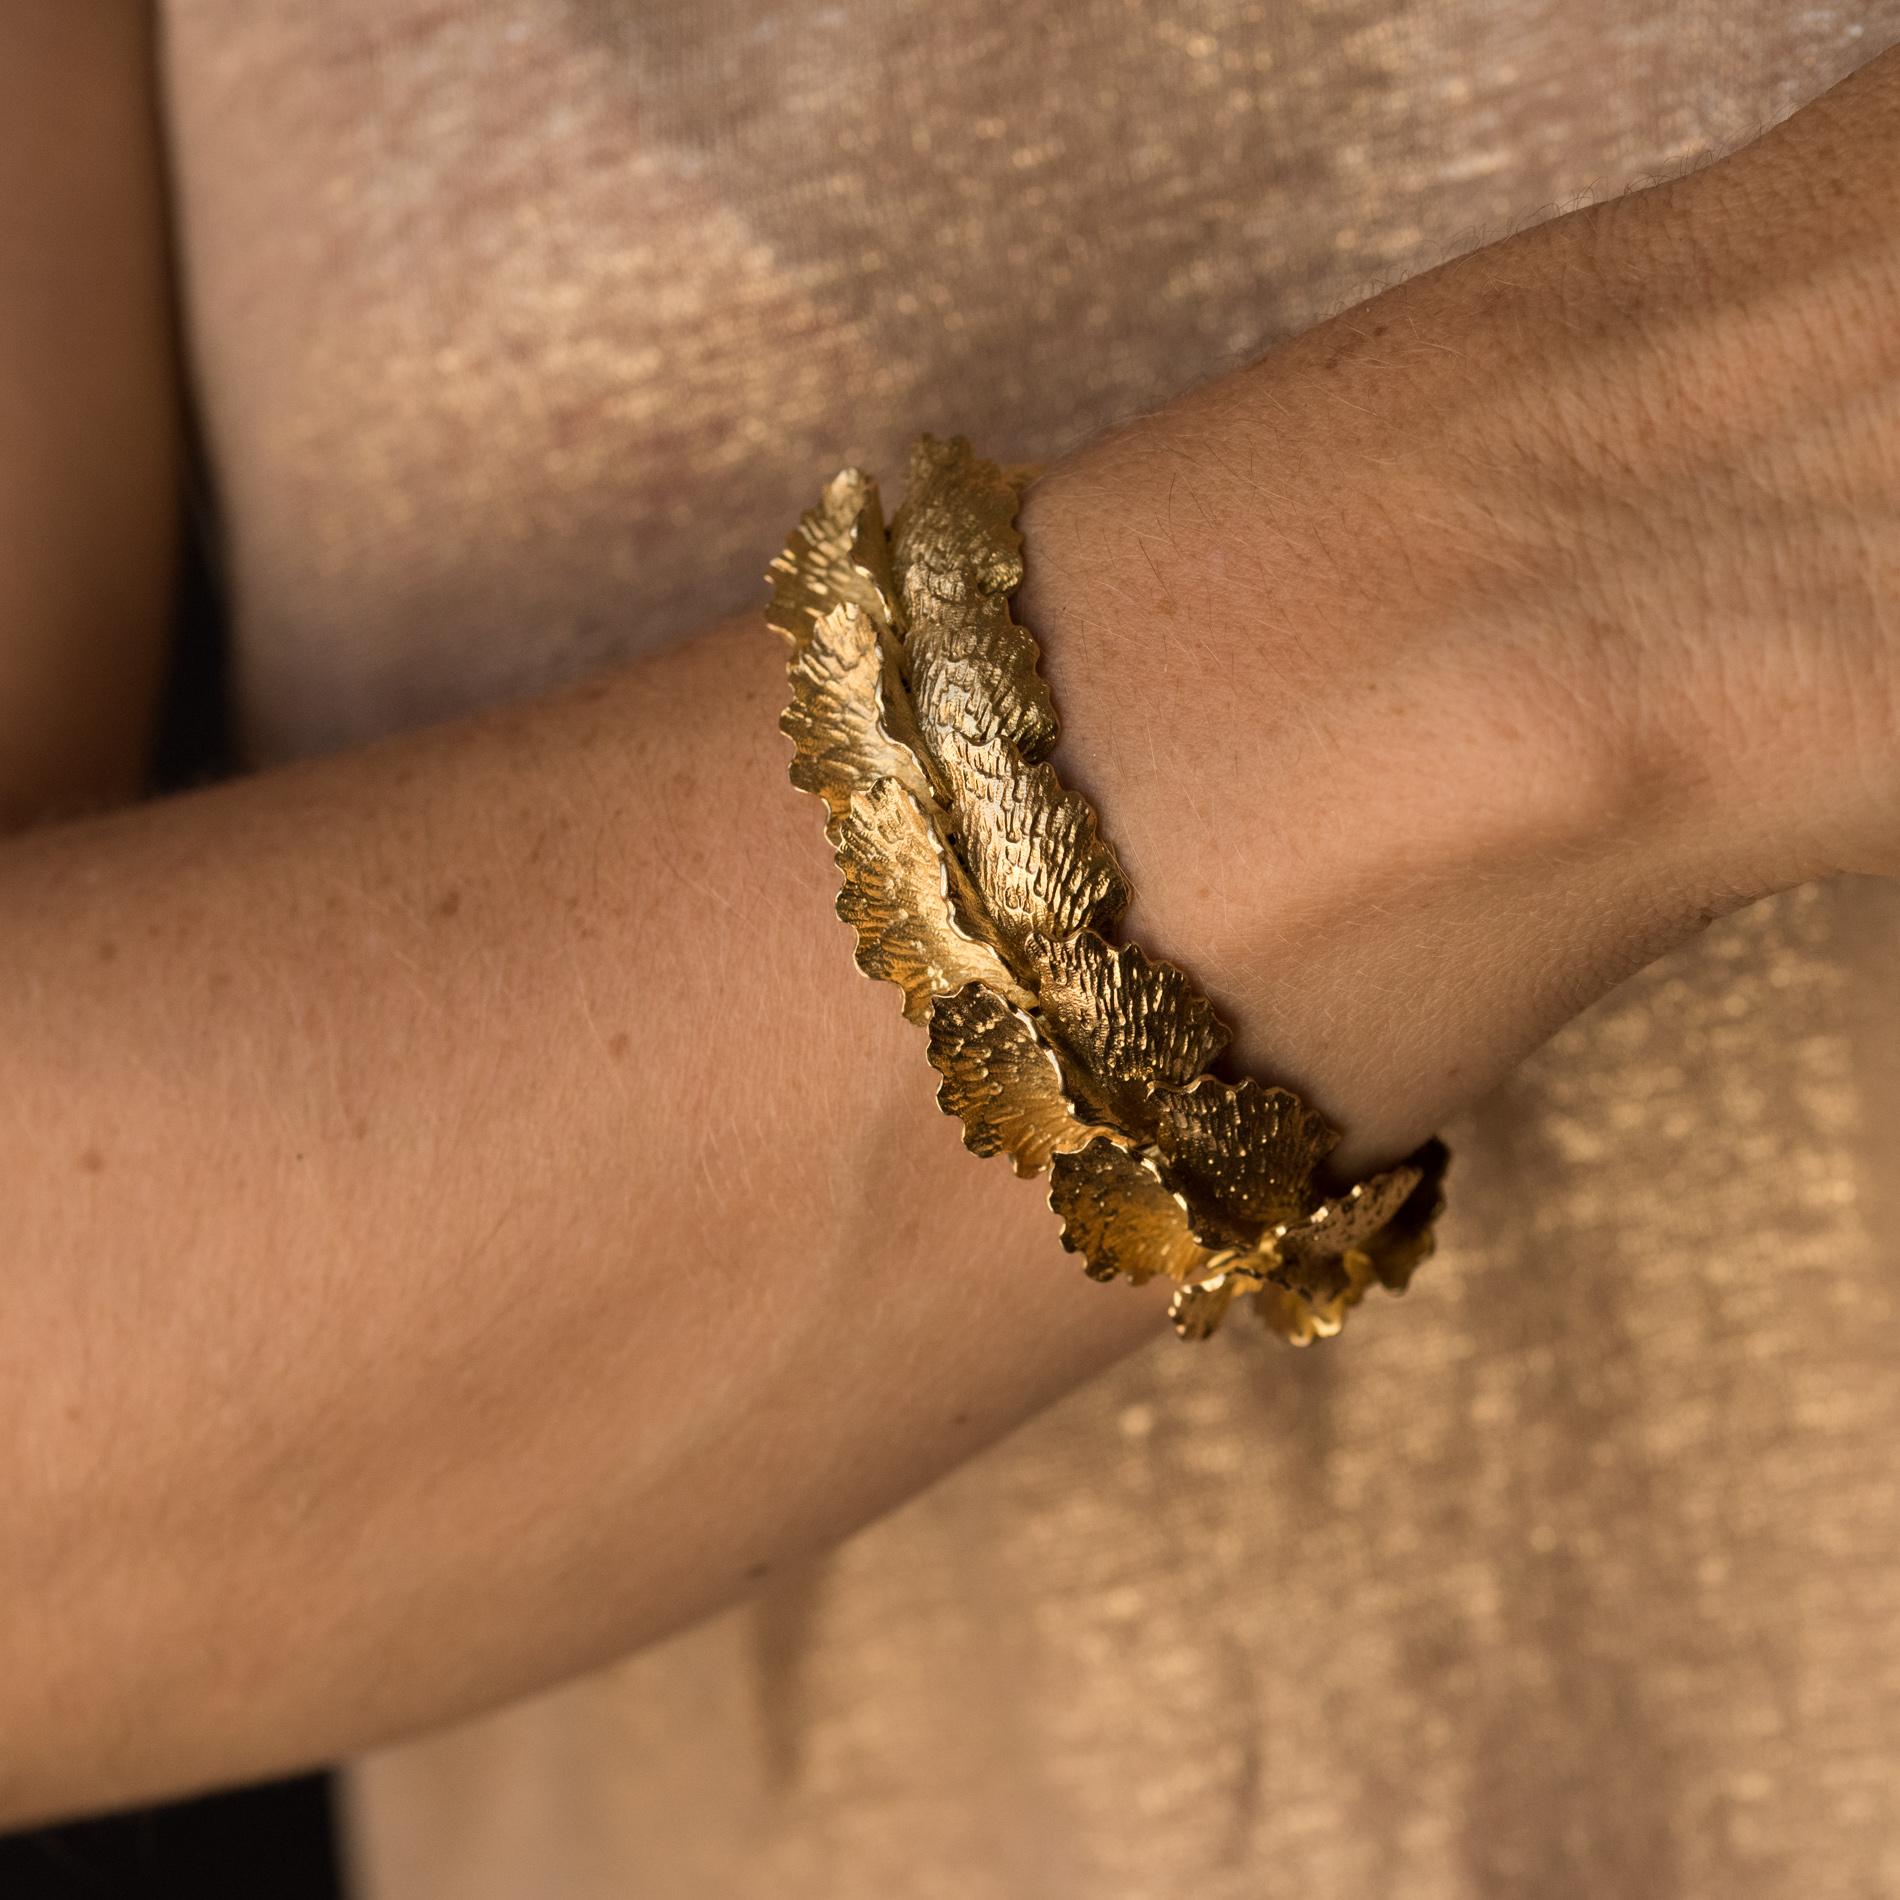 18K Yellow gold bracelet, rhino head hallmark.
An ode to nature and its precious interpretation, this antique gold bracelet is formed of delicately curved Ginkgo Biloba leaves that are finely detailed and articulated. The entirely hand crafted gold